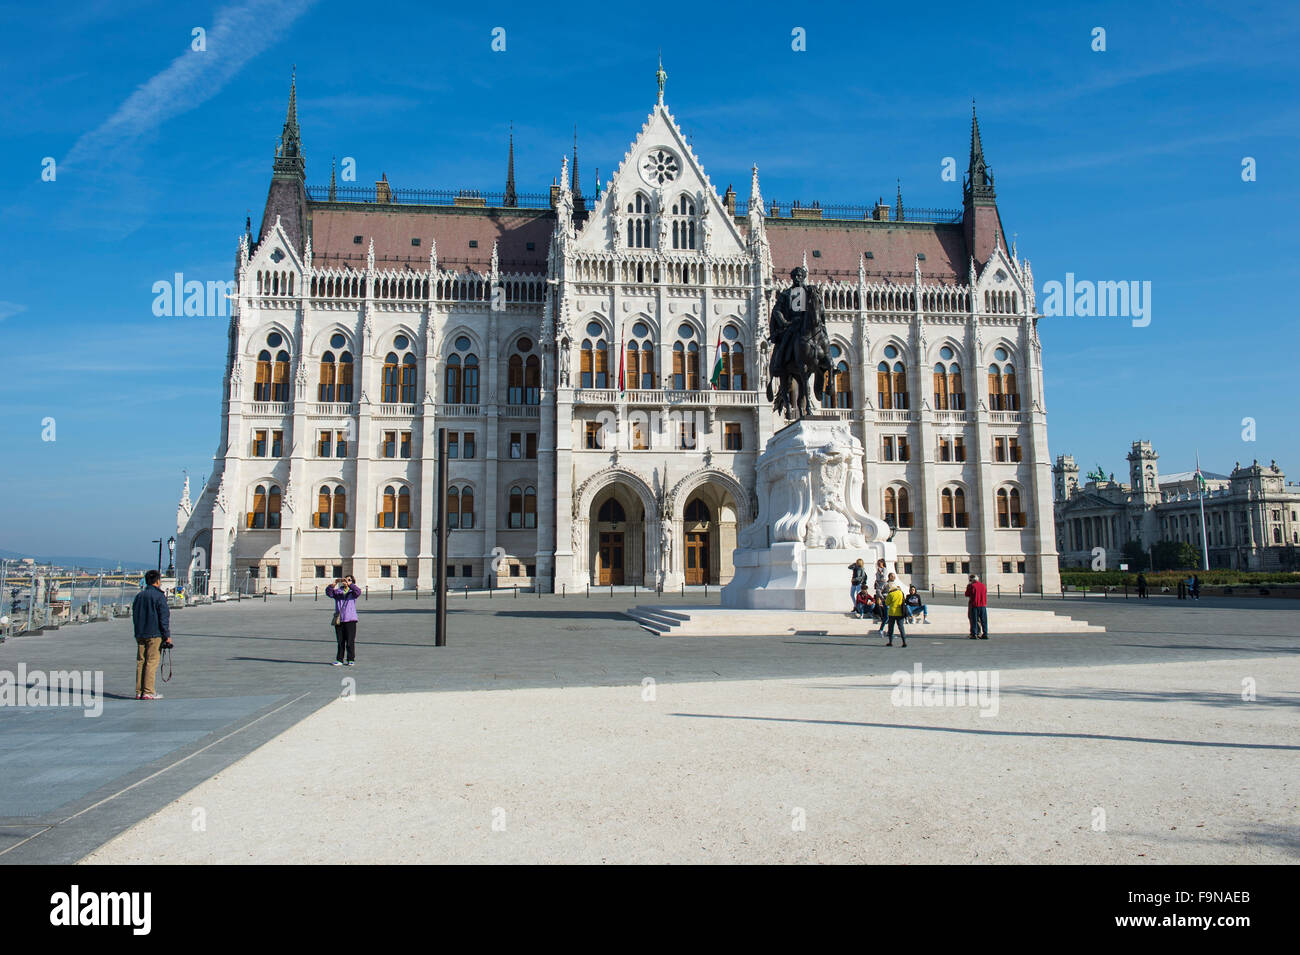 Statue of Count Gyula Andrássy in front of the Hungarian Parliament Building, Budapest, Hungary Stock Photo